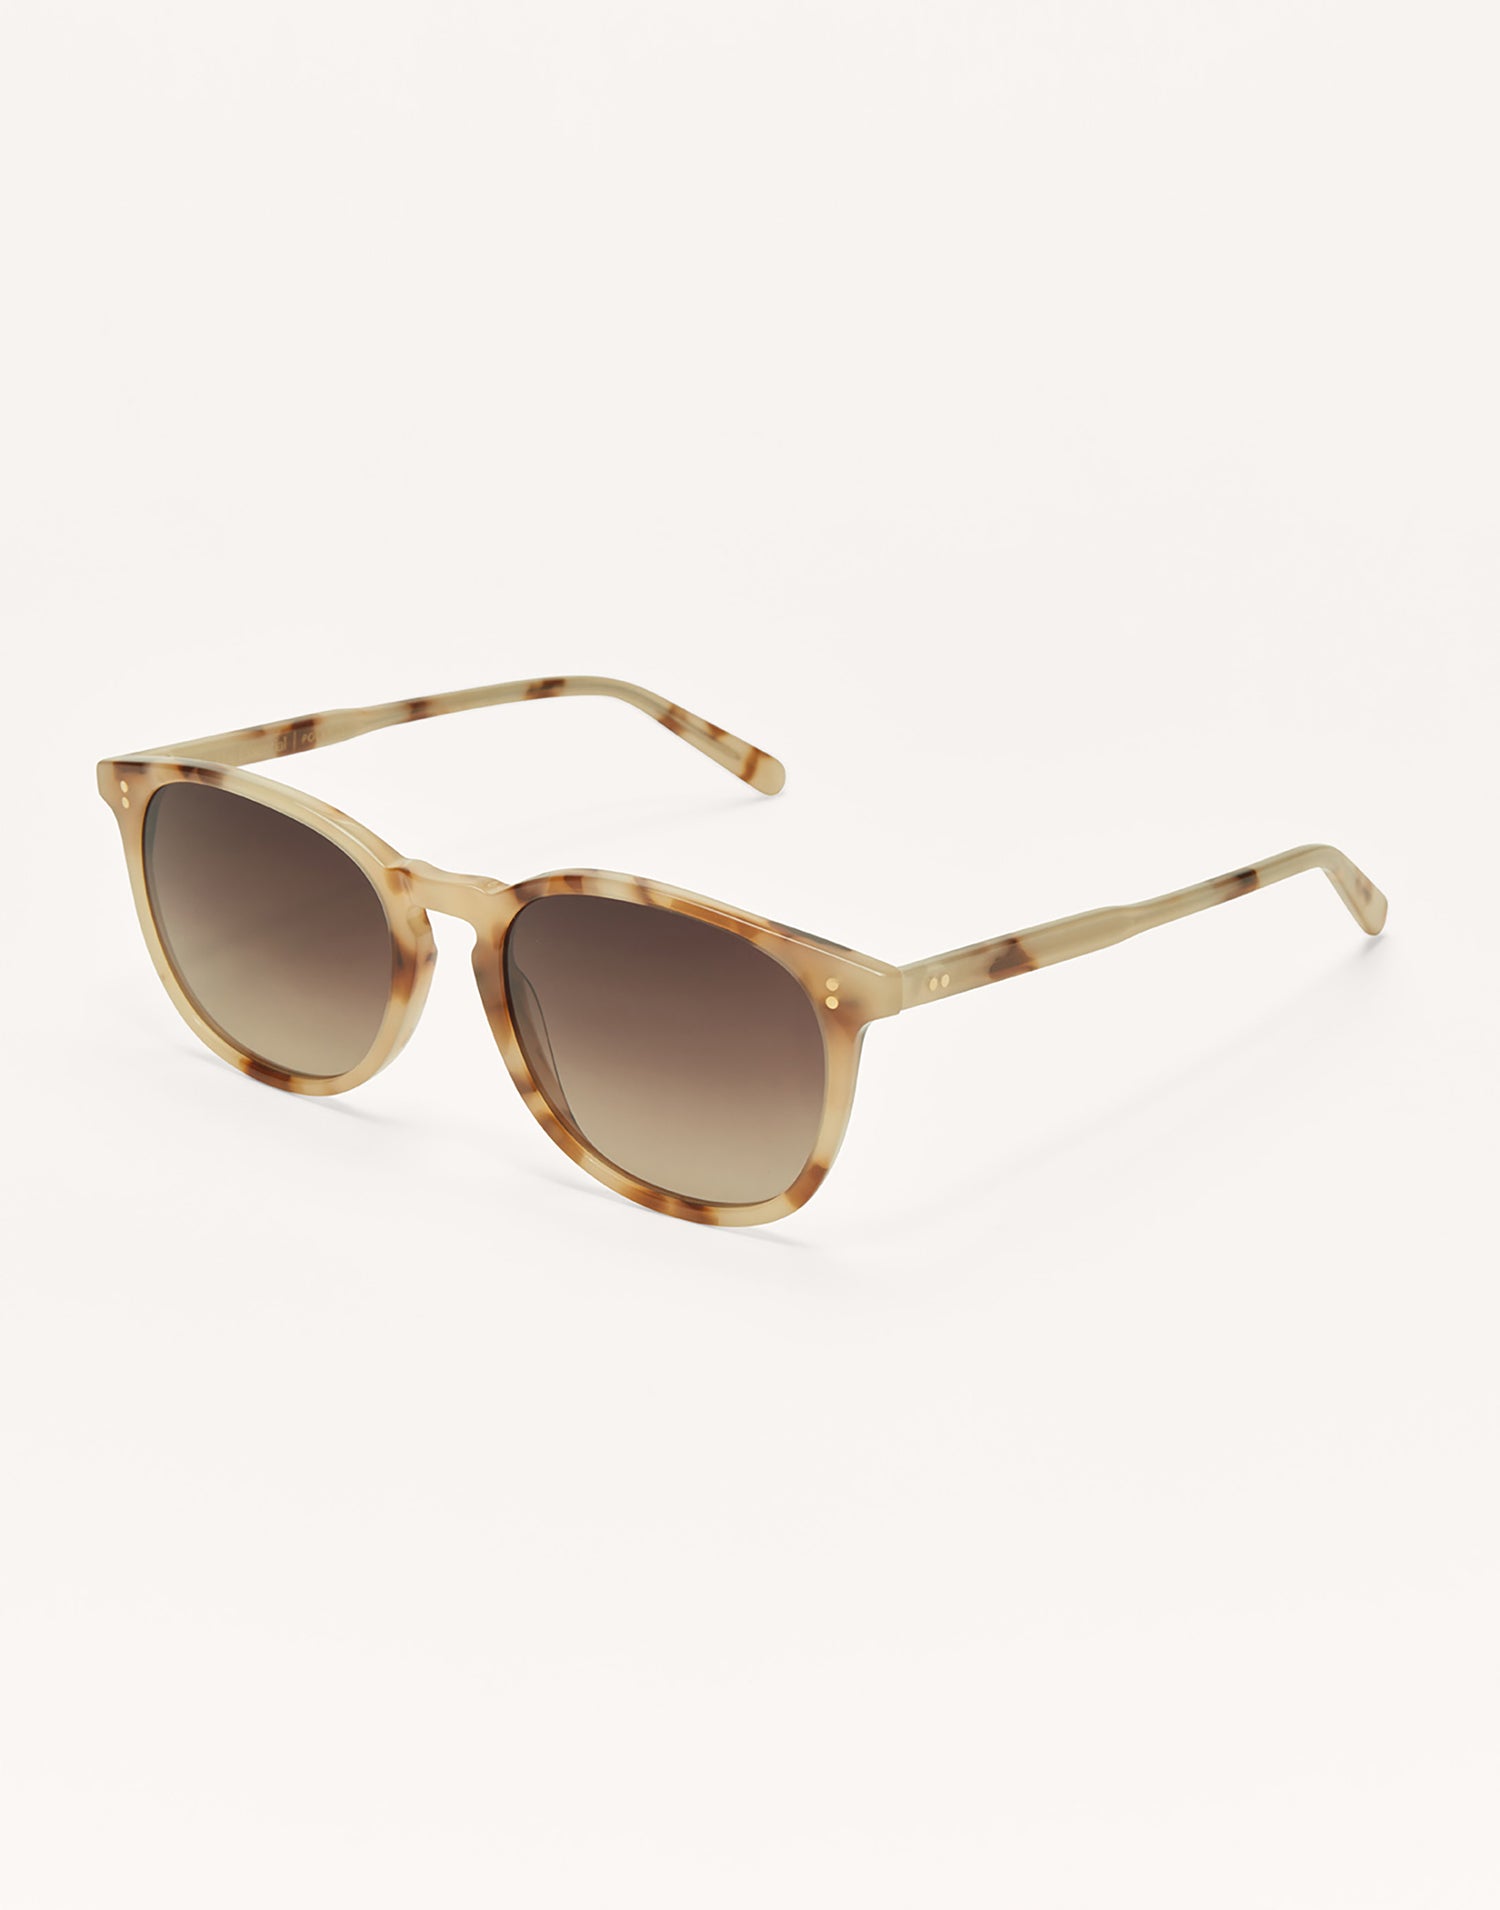 The Essential Sunglasses by Z Supply in Blonde Tort - Angled View